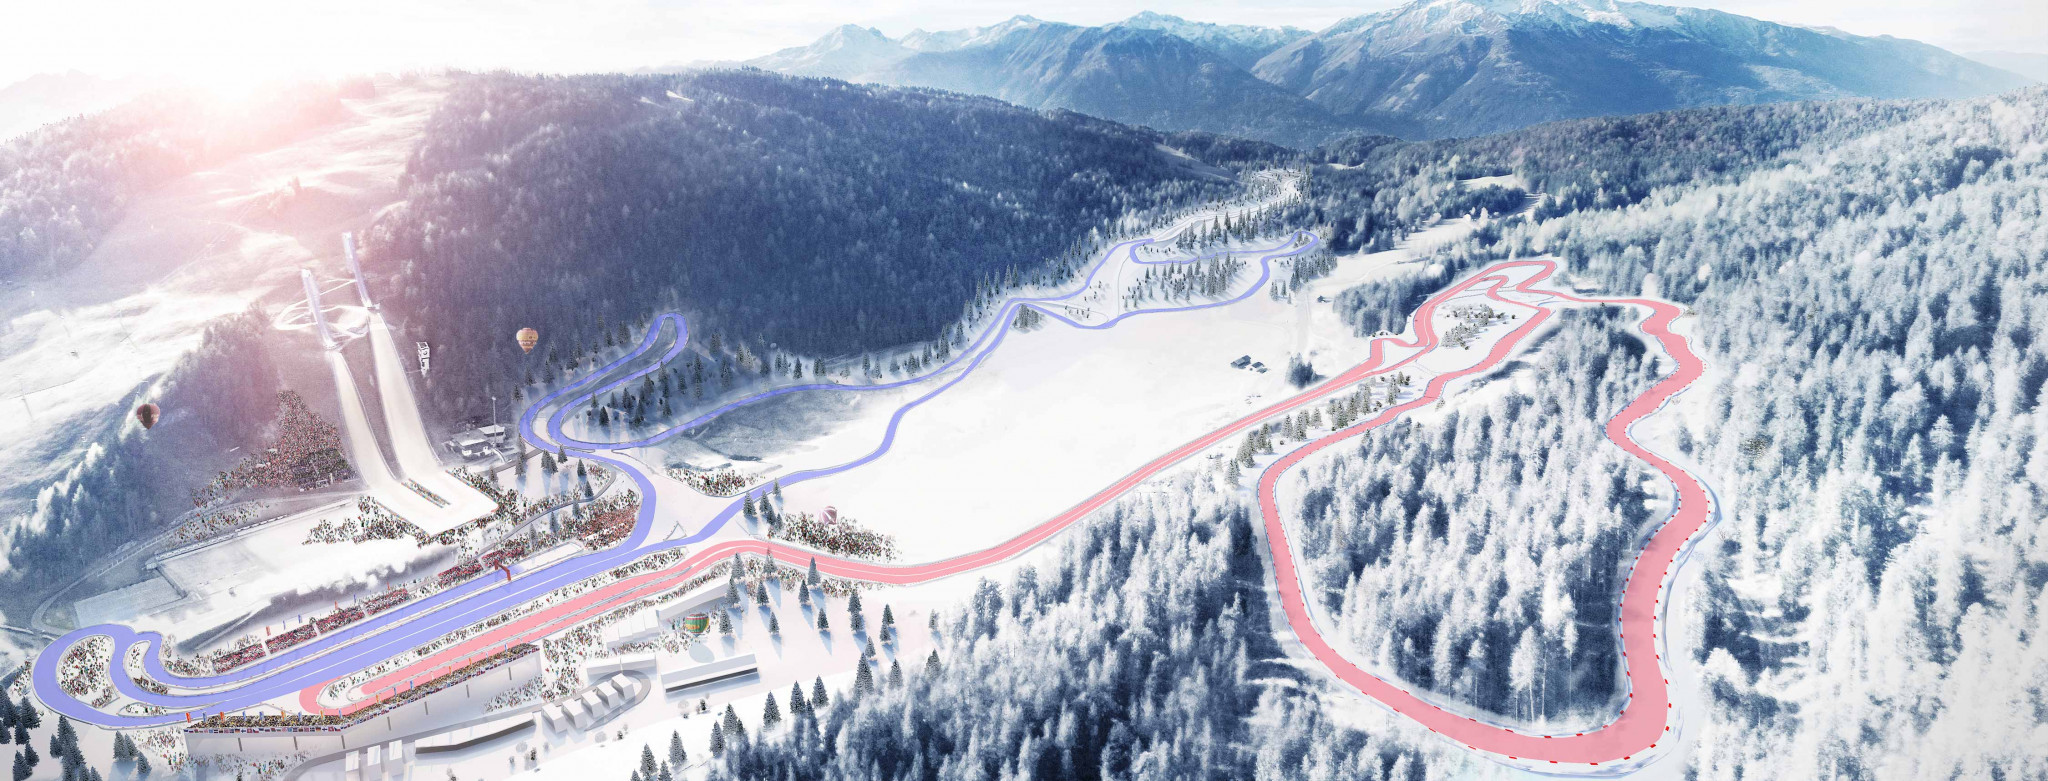 Seefeld is due to host the 2019 FIS Nordic World Ski Championships from February 19 to March 3 ©Seefeld 2019